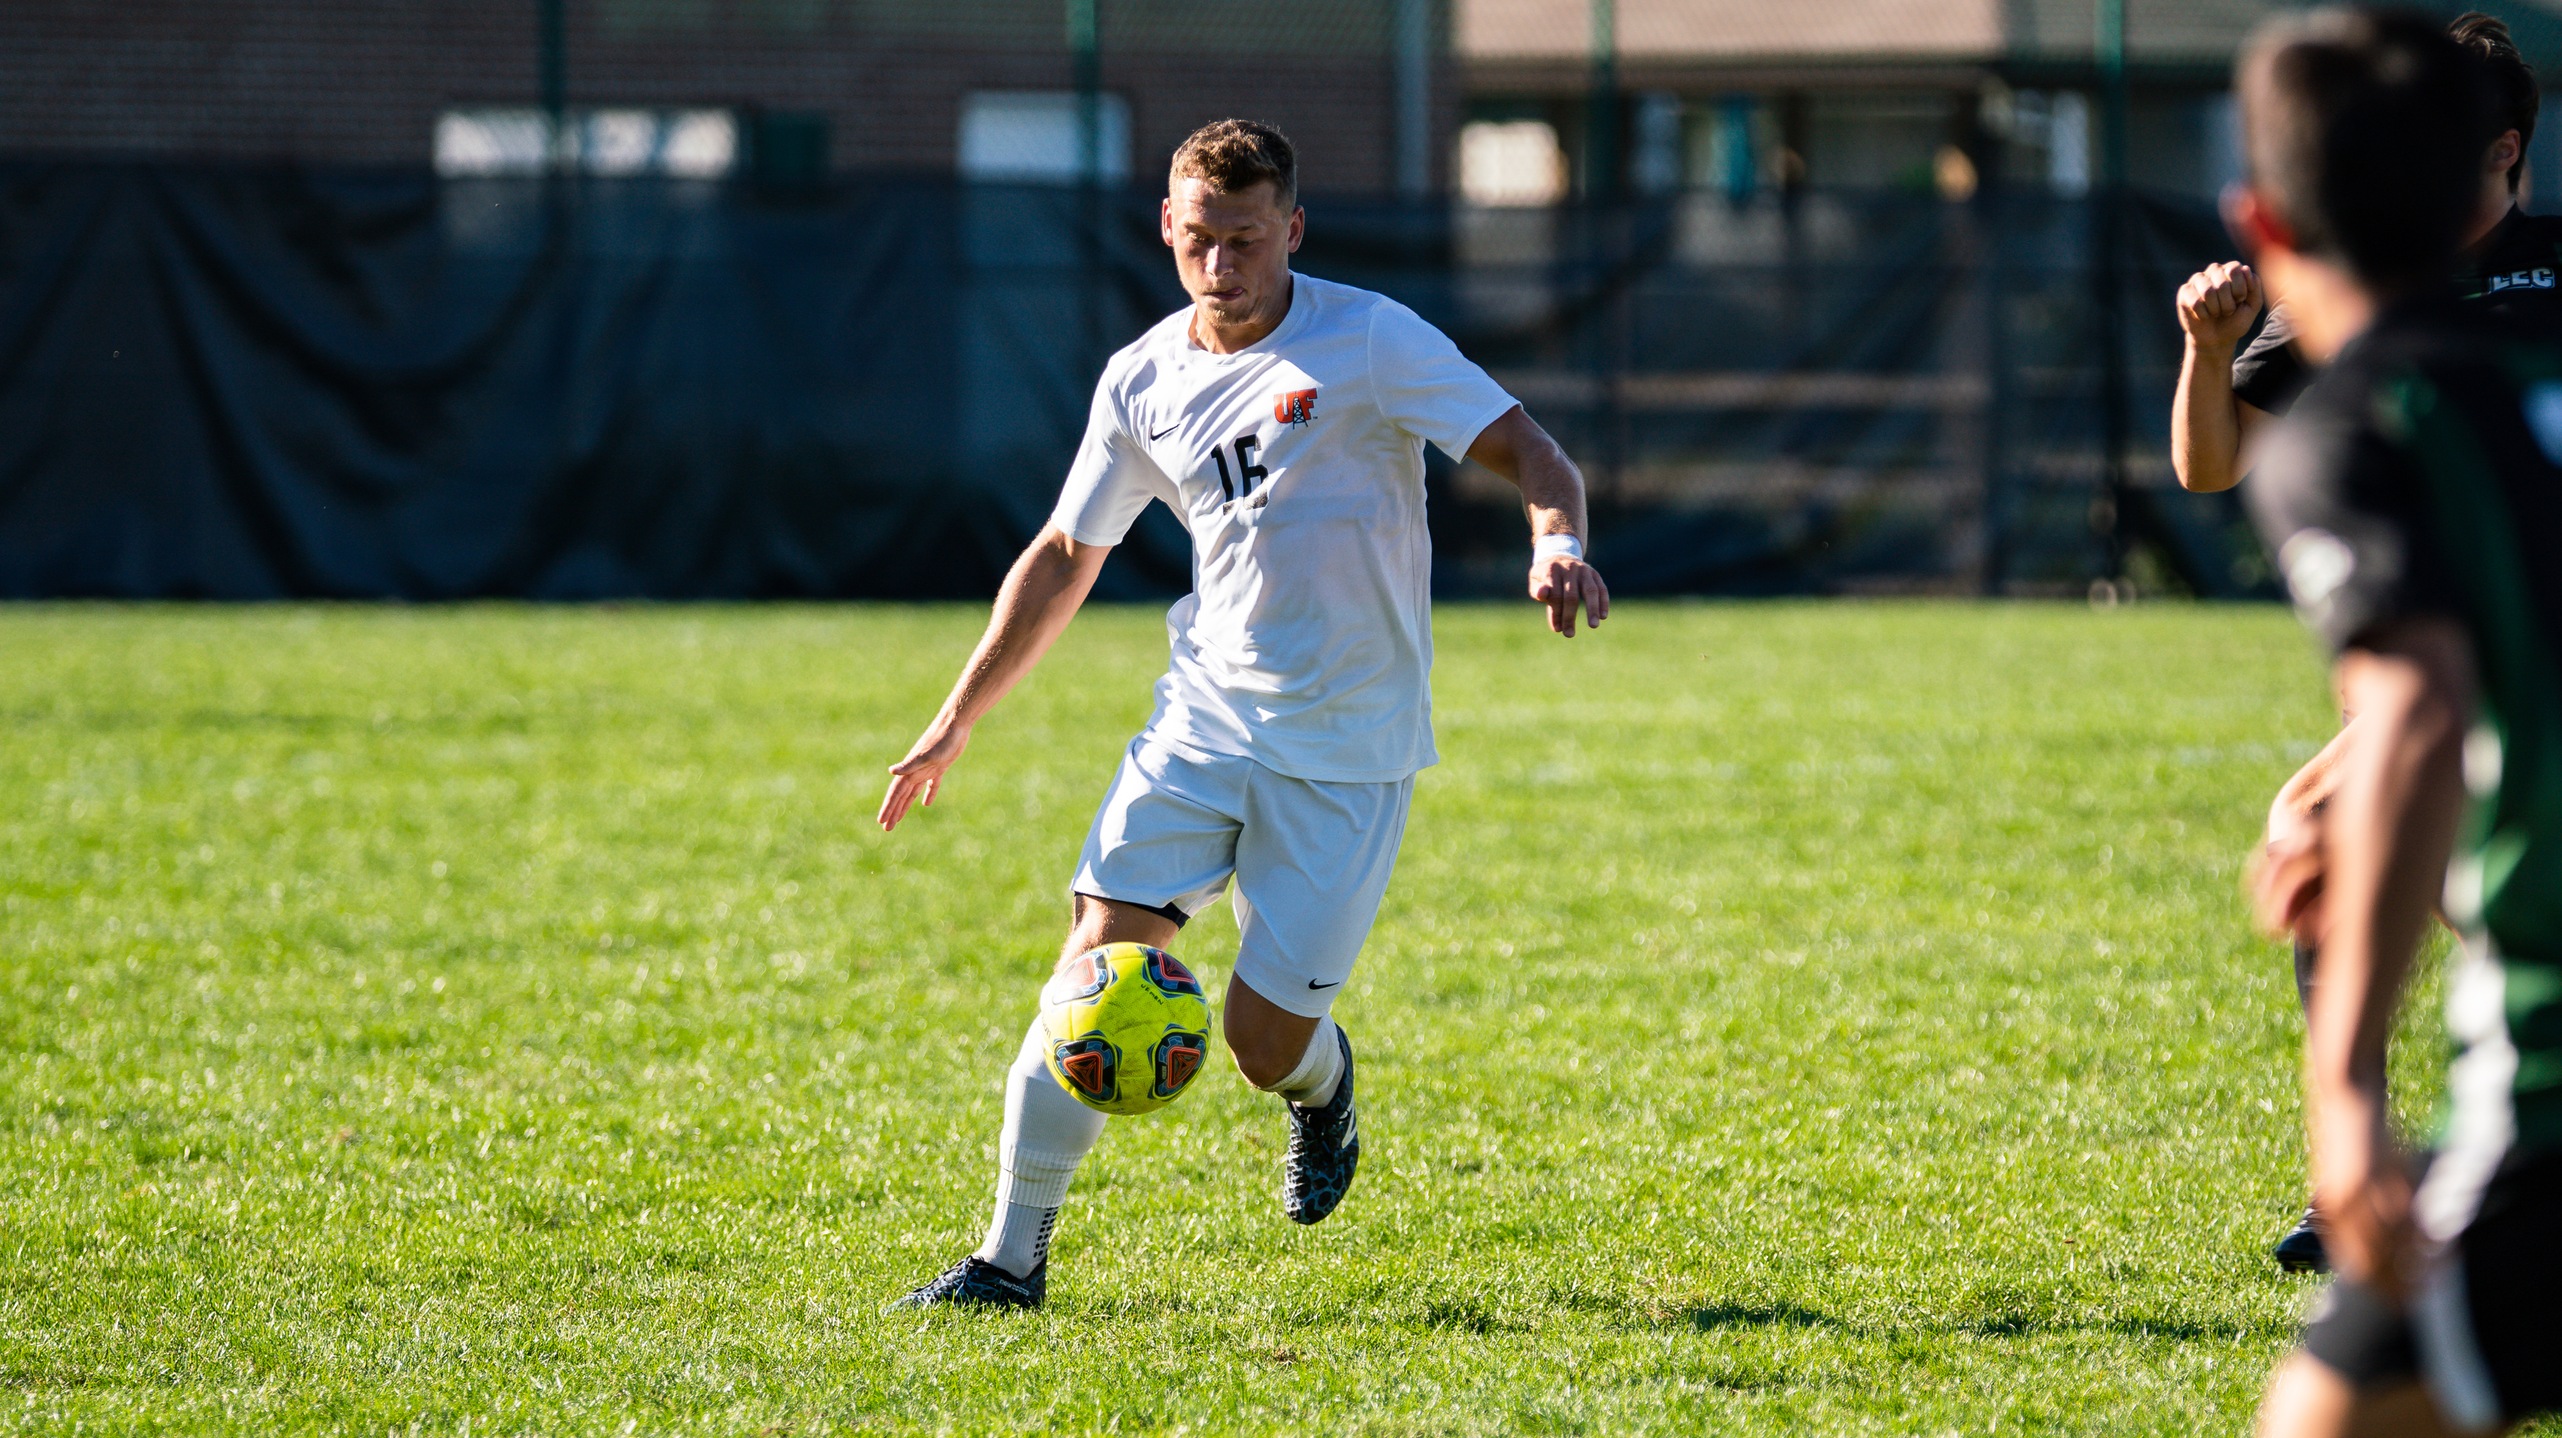 Player in white dribbling ball down field

